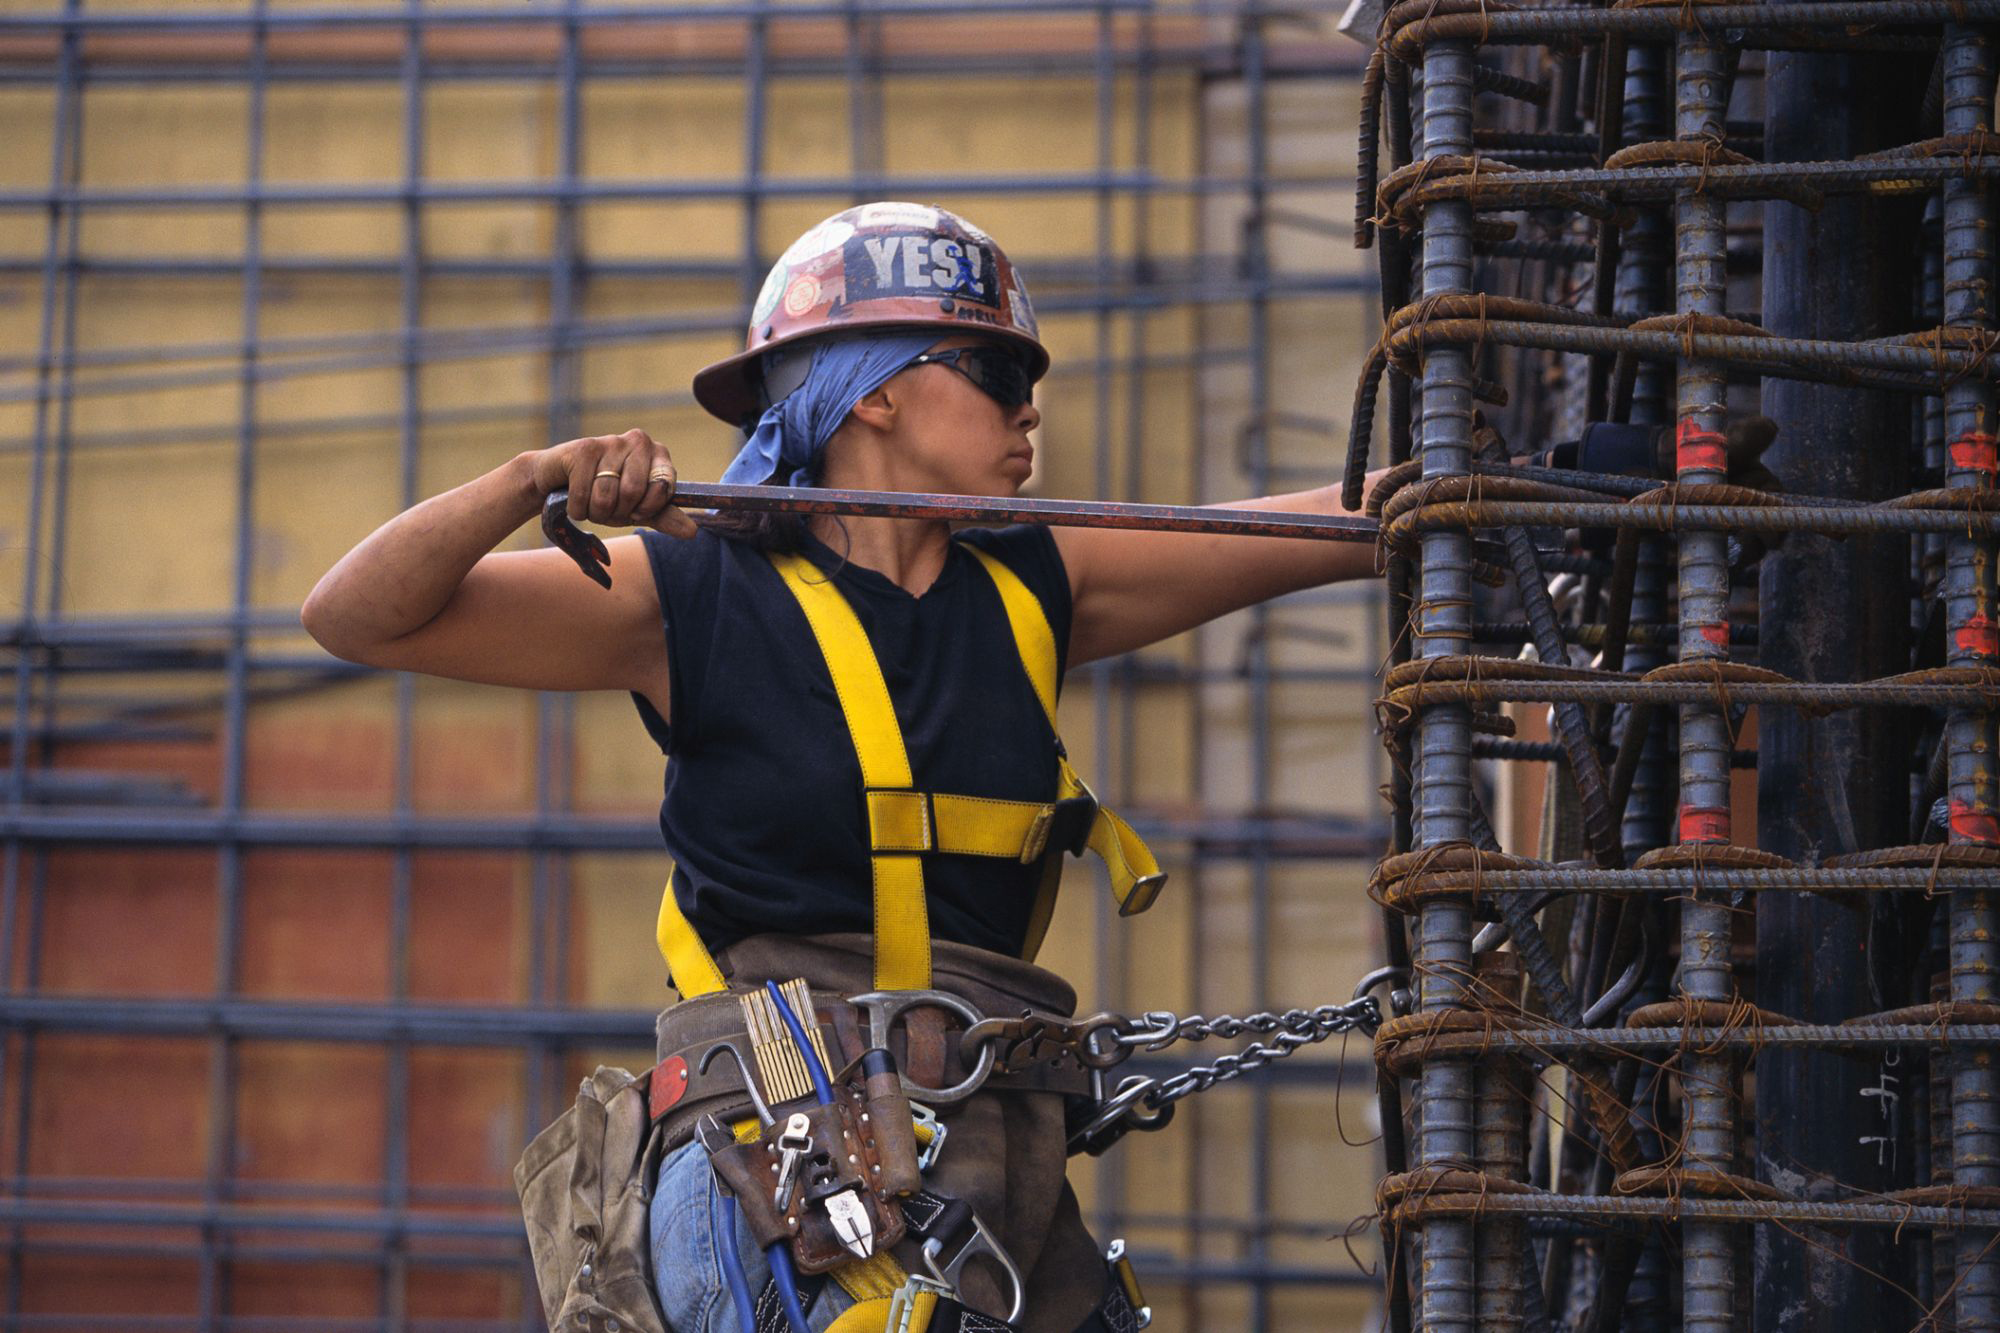 Woman construction worker with hard hat installing rebar on a column.